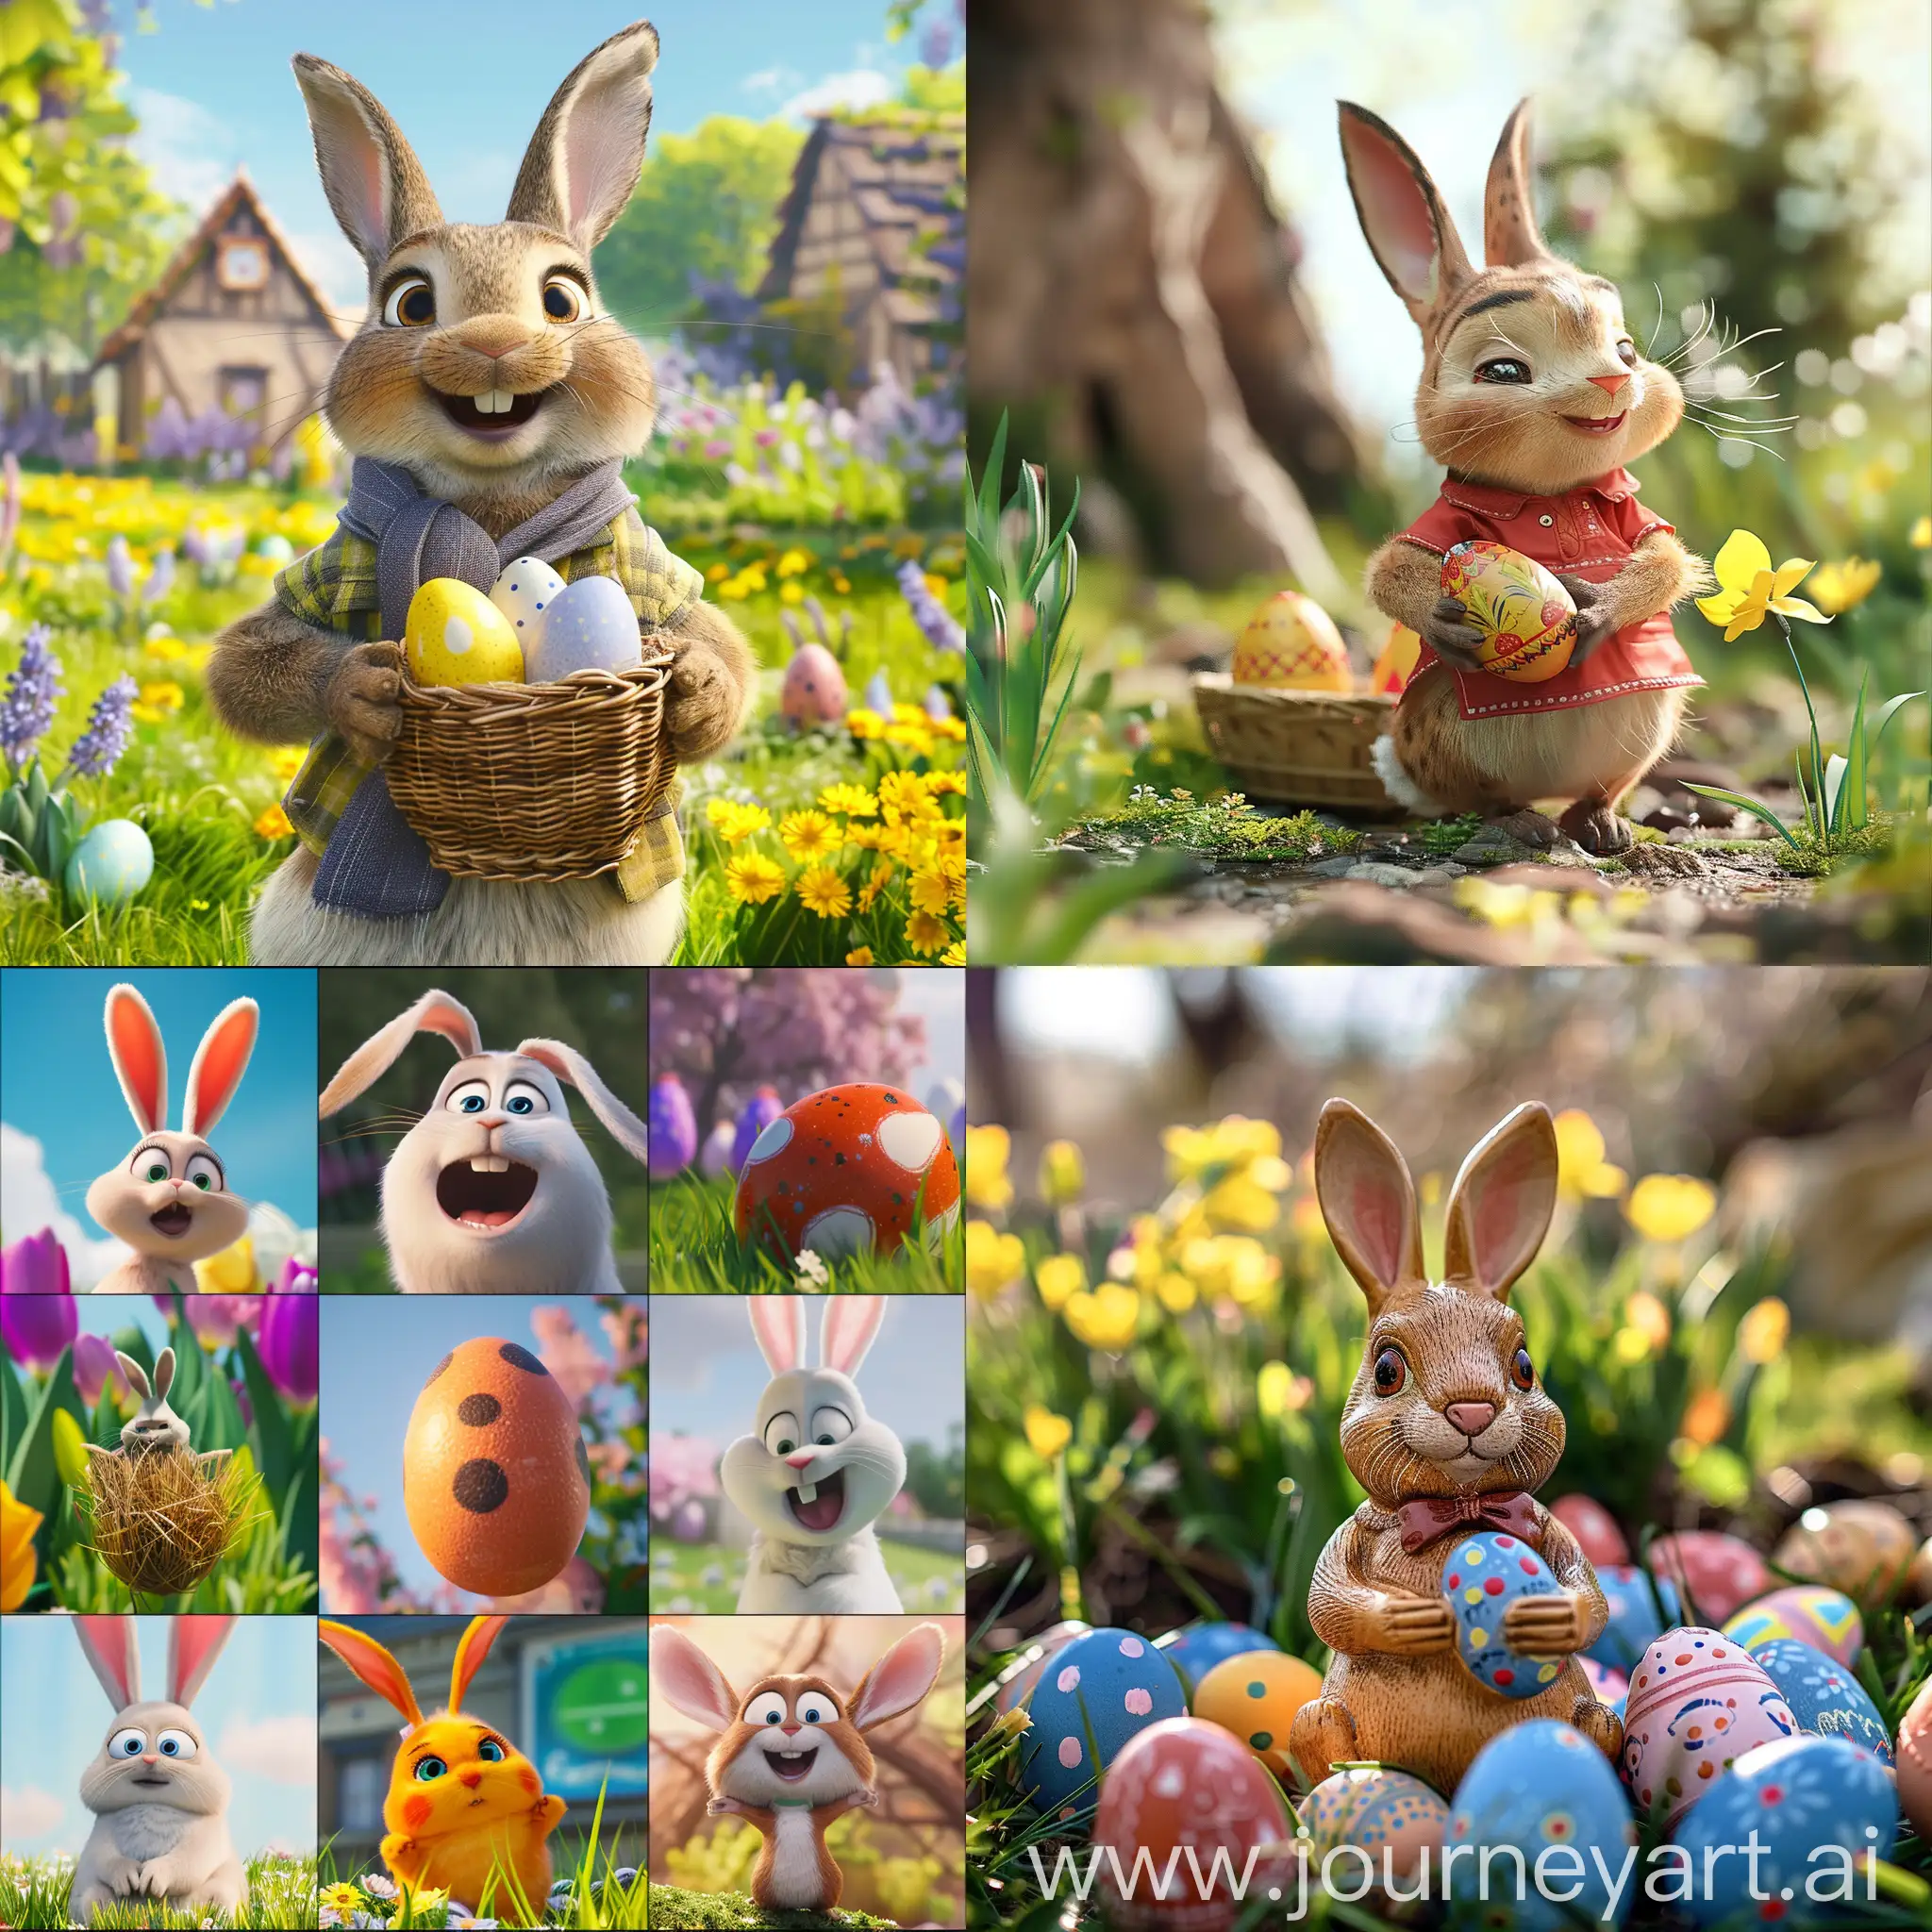 Easter-Movie-Theme-Vibrant-Scene-with-Easter-Characters-in-11-Aspect-Ratio